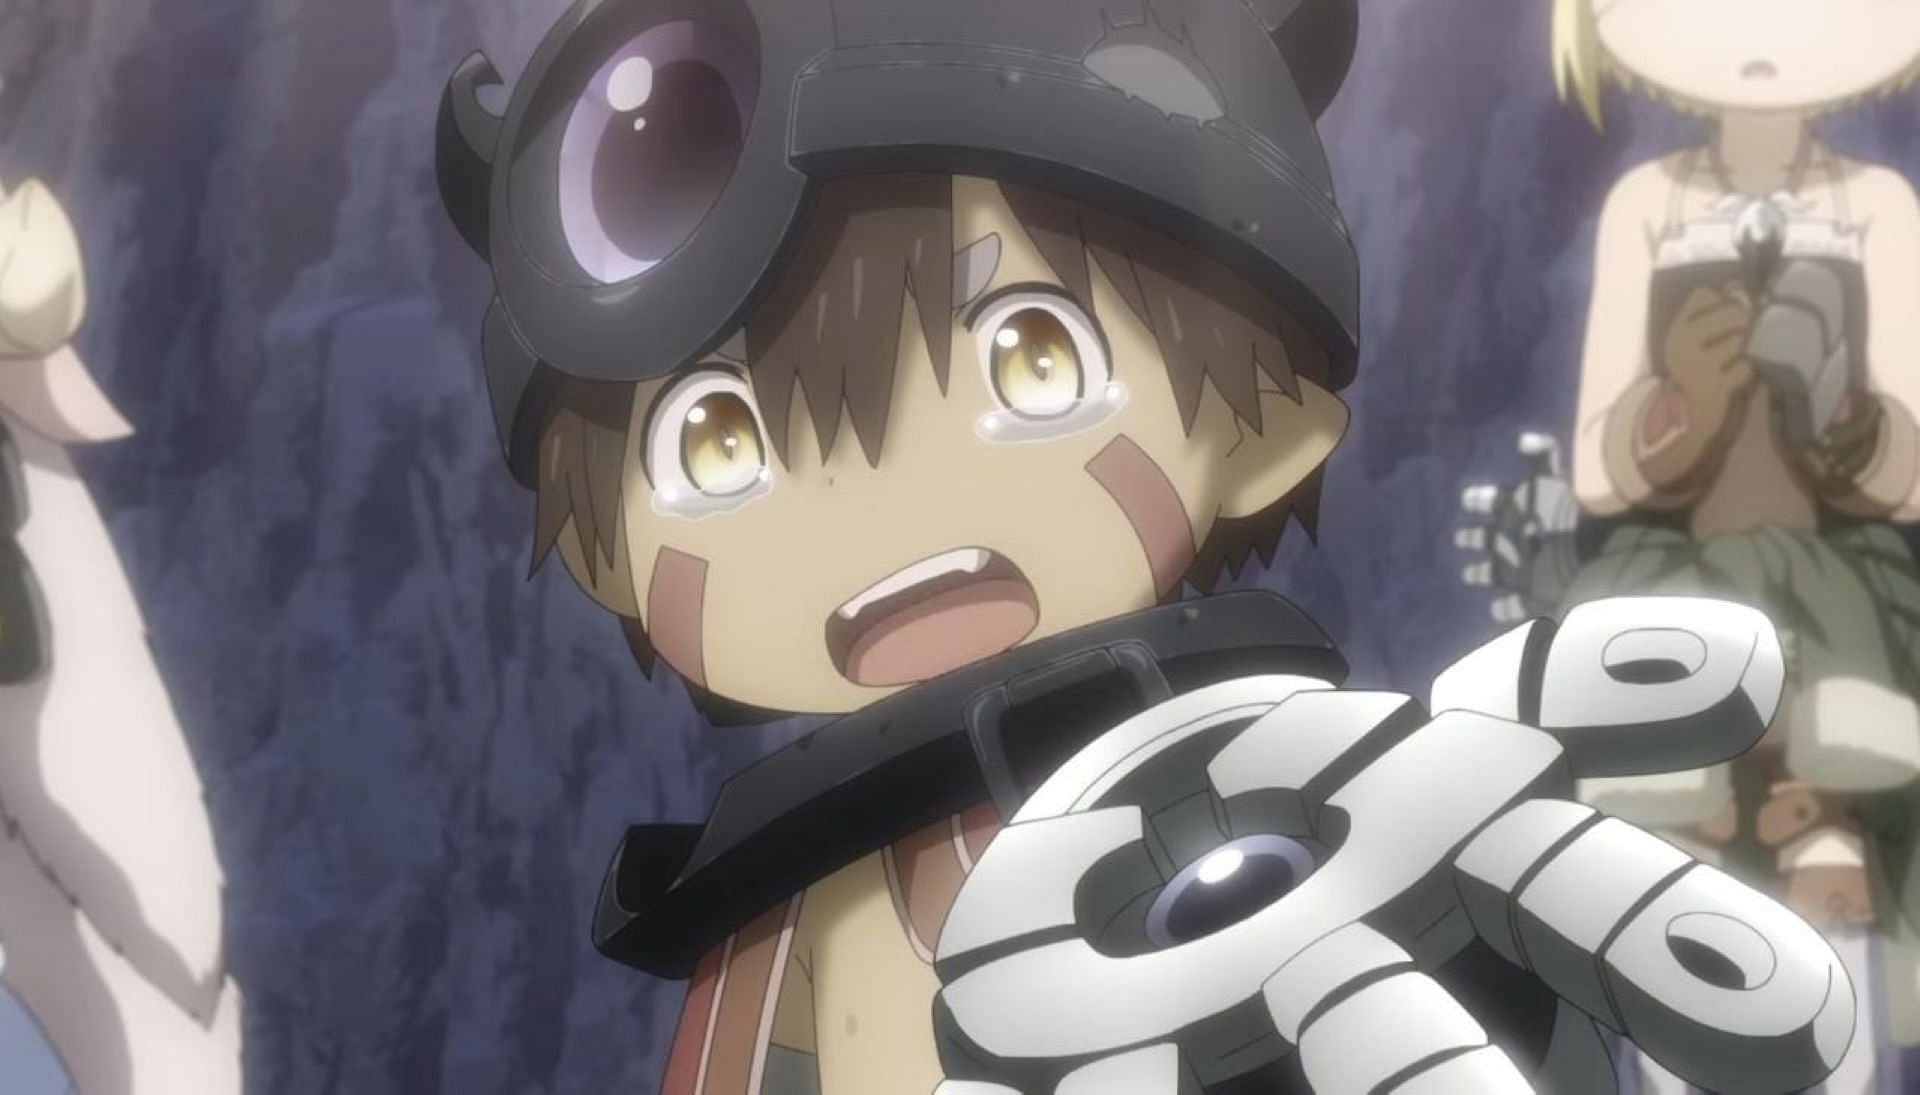 Made in Abyss Sets Season 2 Release Date